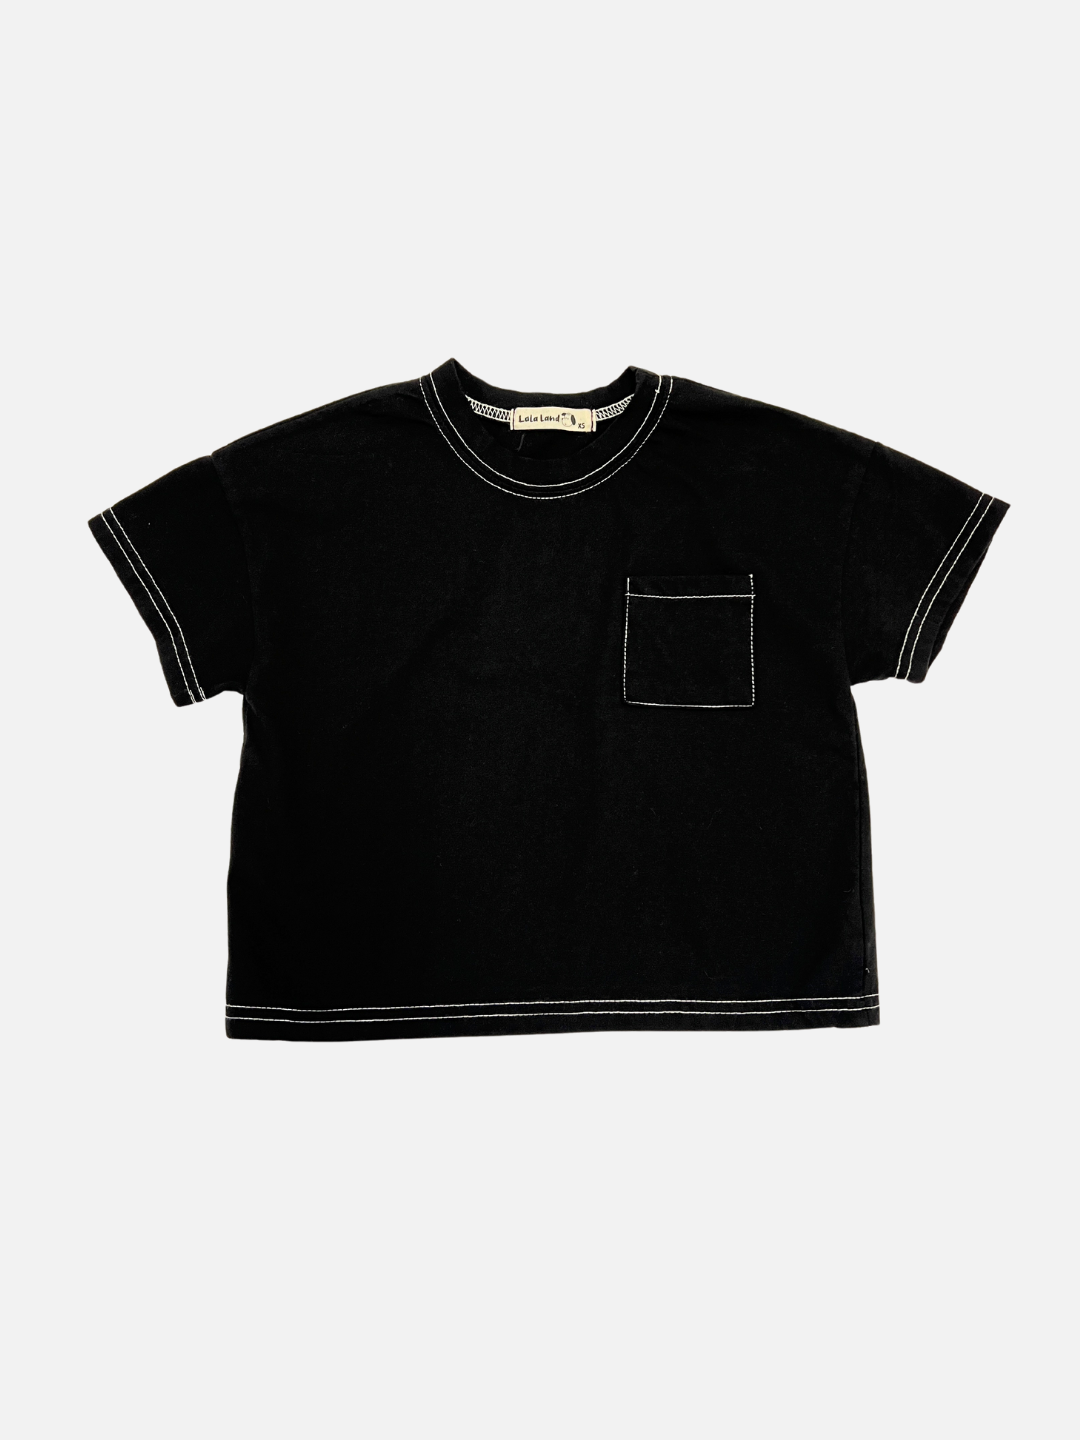 Black | Front view of the kids' stitch pocket tee in Black featuring contrast white stitch and a small pocket on the right side